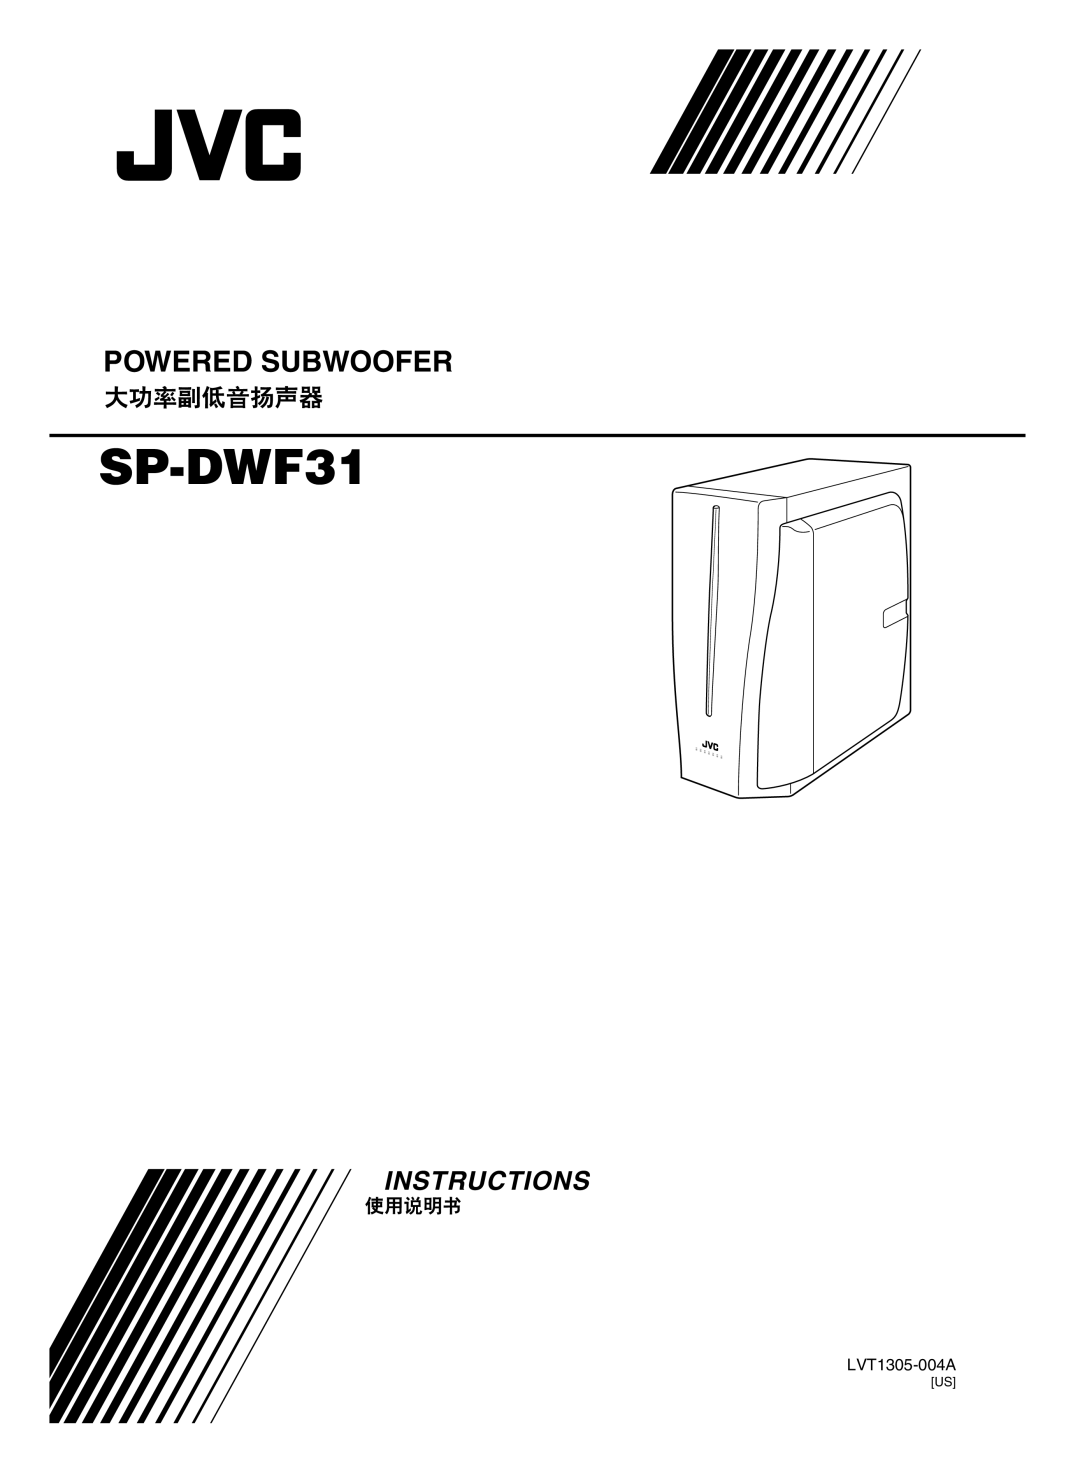 JVC LVT1305-004A manual SP-DWF31, Compact Component System, Powered Subwoofer, Instructions,  !#$% 